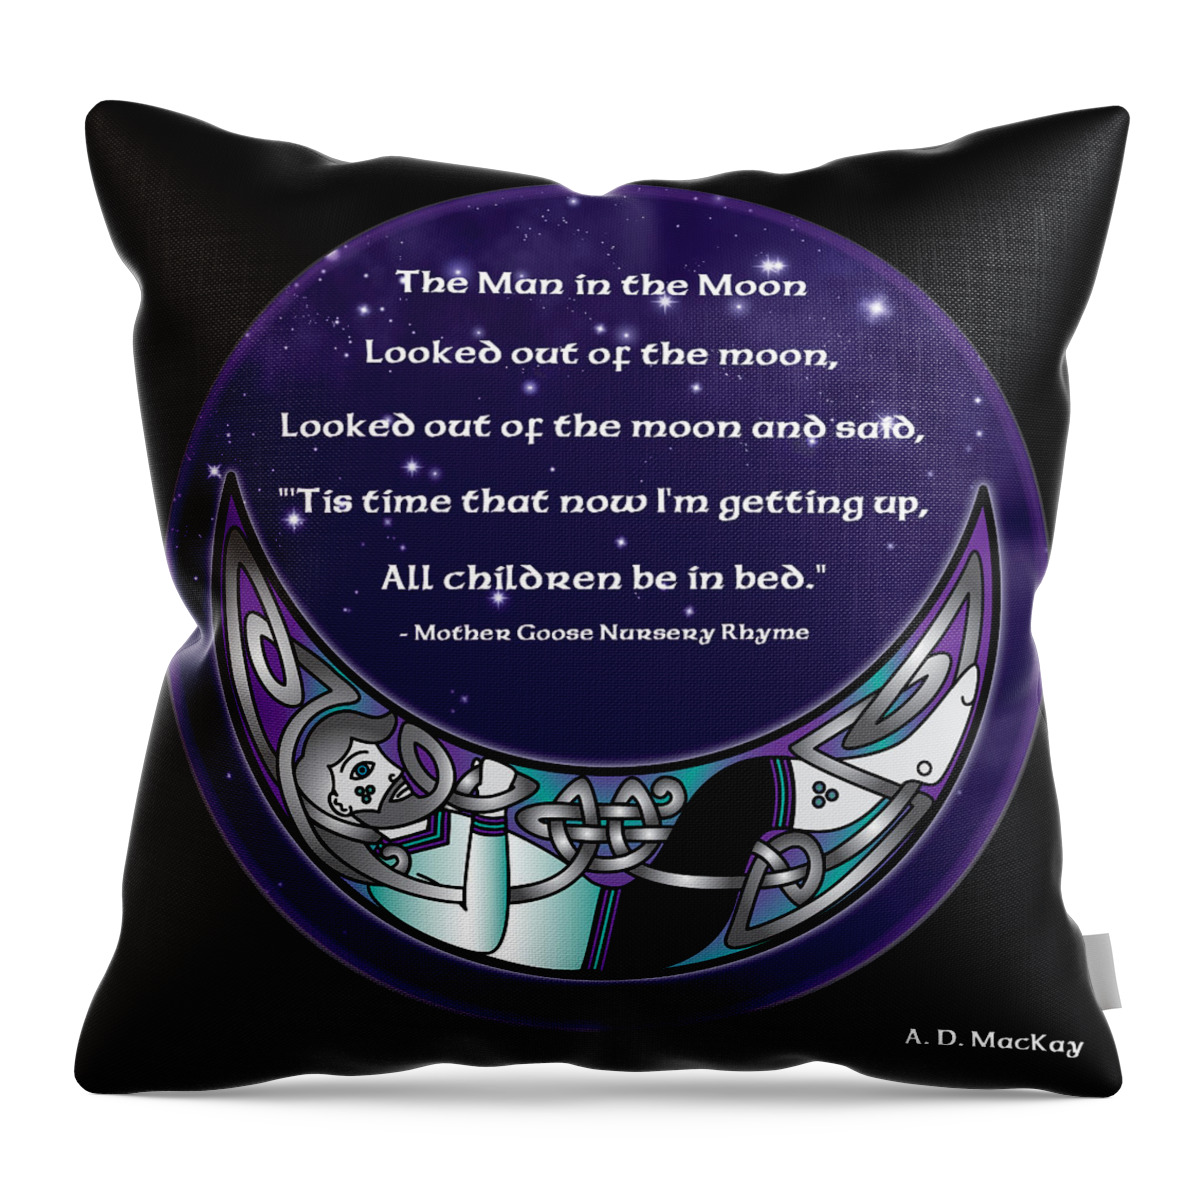 Celtic Art Throw Pillow featuring the digital art The Man in the Moon by Celtic Artist Angela Dawn MacKay